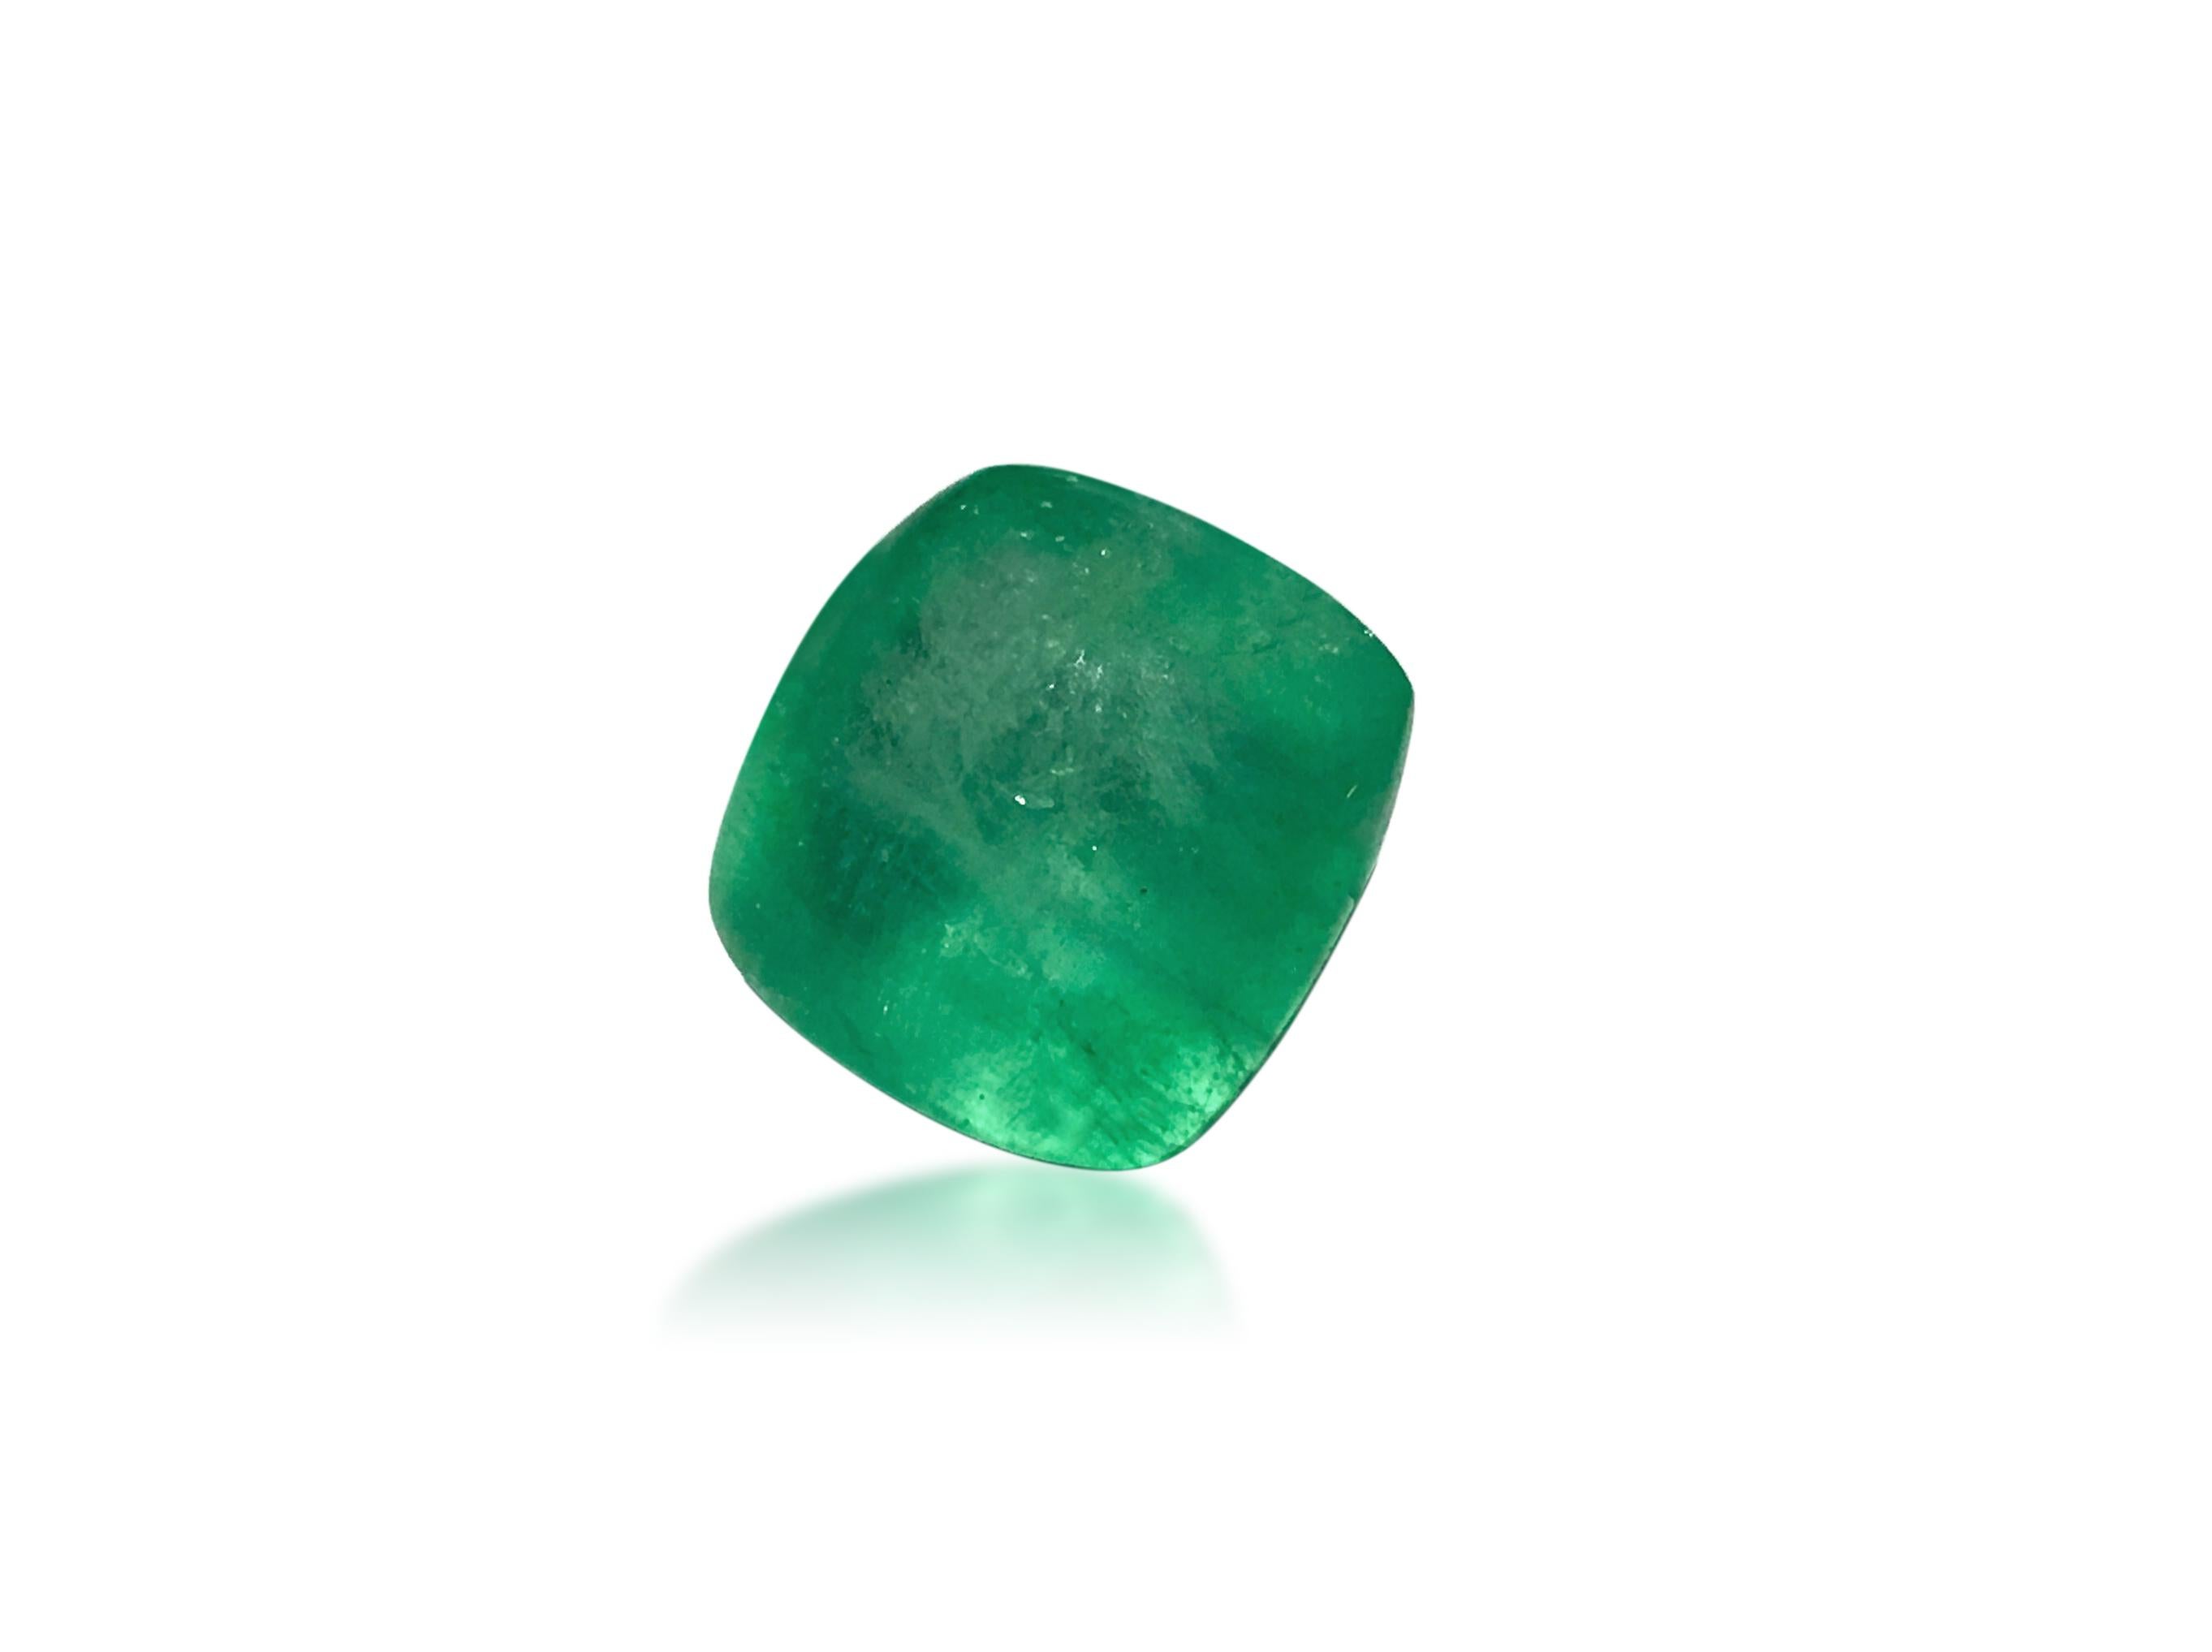 Presenting this exquisite loose emerald, featuring a superb sugar loaf cut and boasting an impressive weight of 23.65 carats, with dimensions of 6.50 x 6.60 mm. Its deep color and shine, coupled with its strong green hue, make it a standout